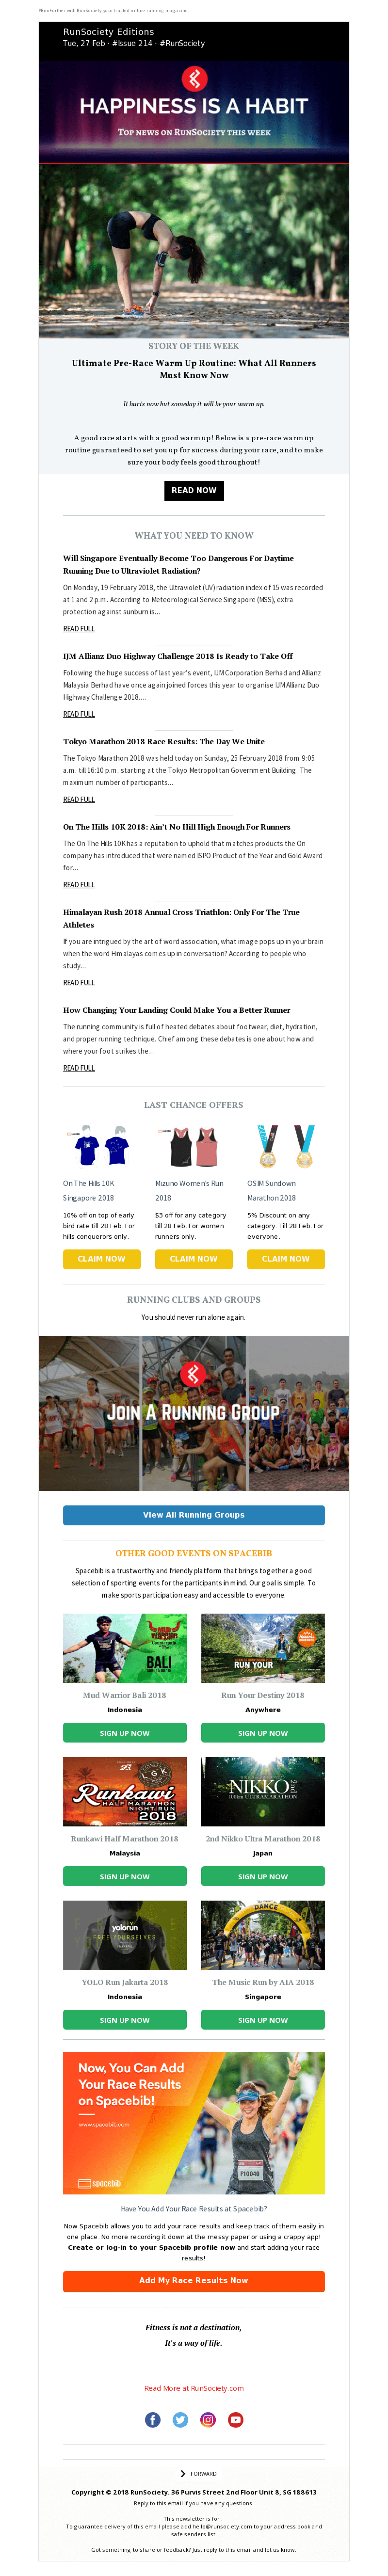 RunSociety example - Made with MailerLite